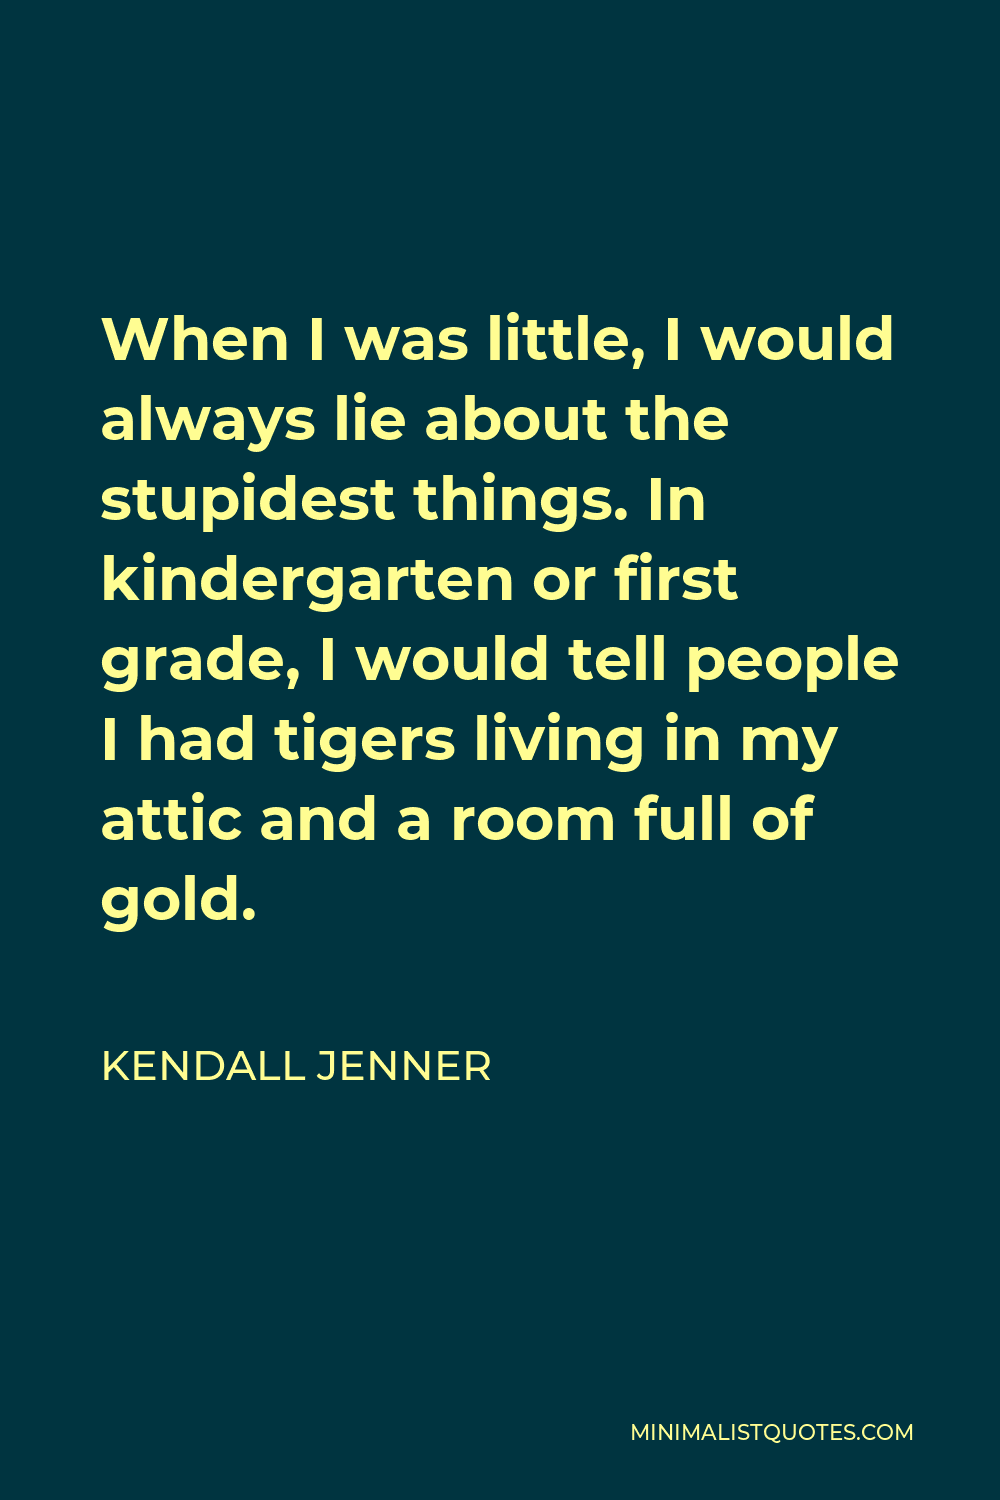 Kendall Jenner Quote - When I was little, I would always lie about the stupidest things. In kindergarten or first grade, I would tell people I had tigers living in my attic and a room full of gold.